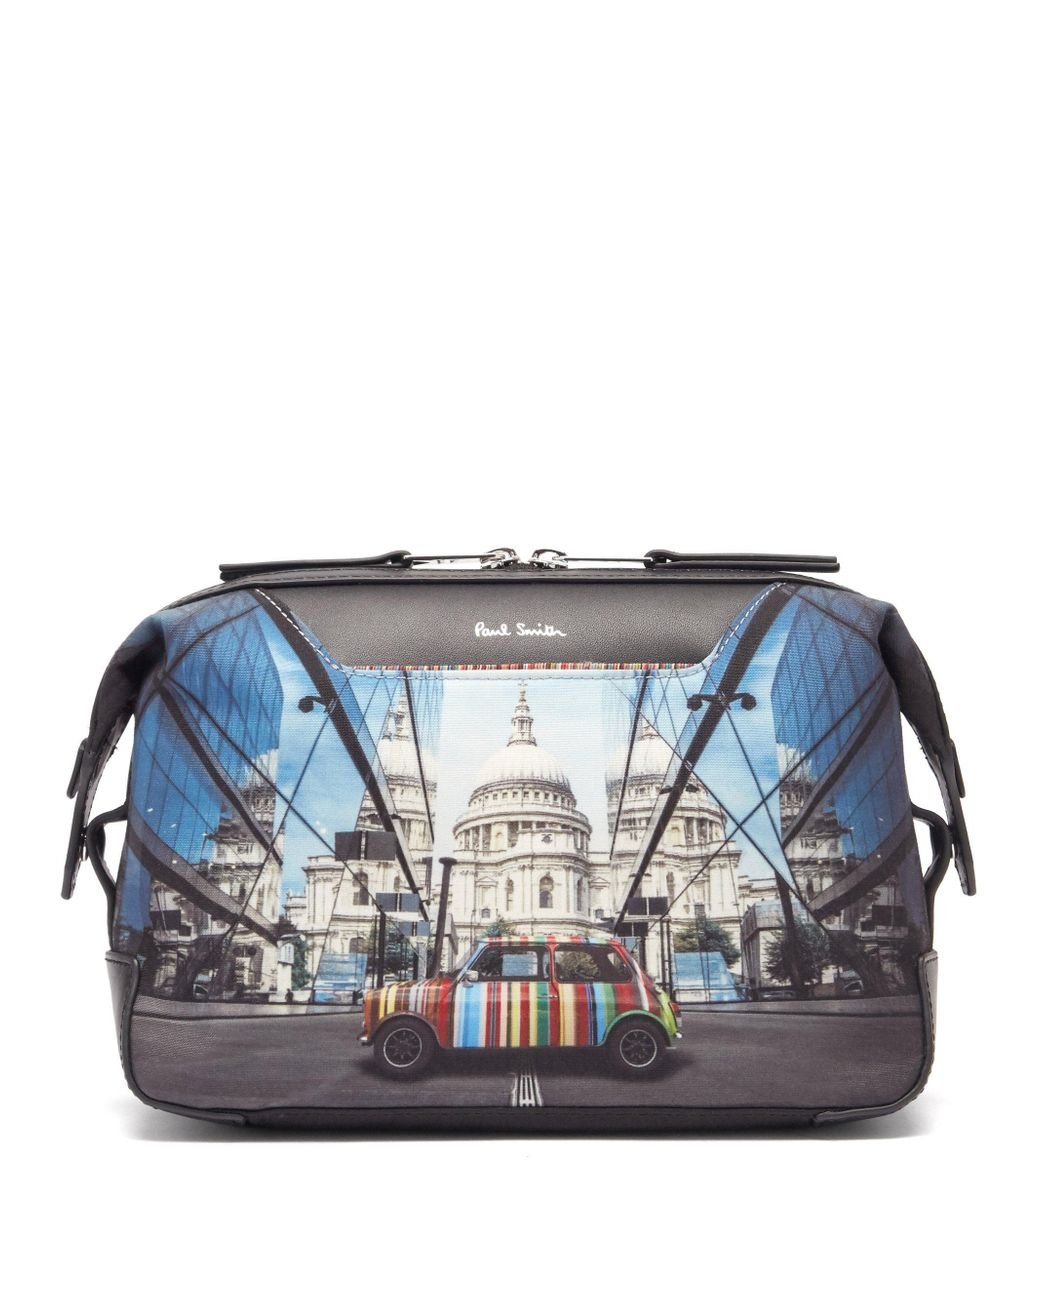 Paul Smith Mini Saint Paul's Canvas And Leather Wash Bag for Men - Lyst